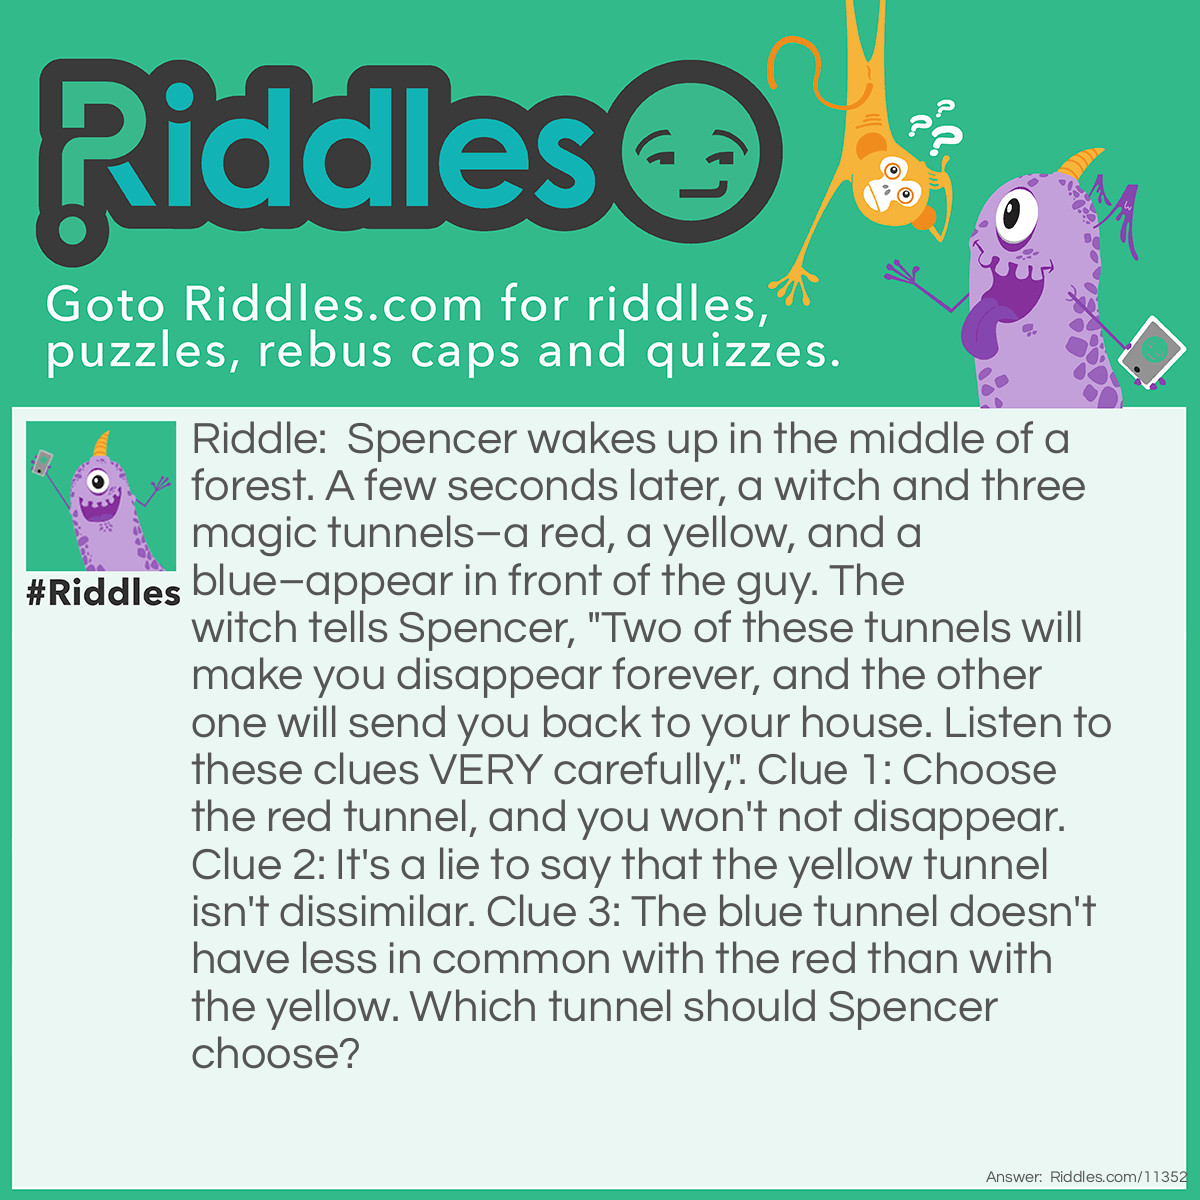 Riddle: Spencer wakes up in the middle of a forest. A few seconds later, a witch and three magic tunnels–a red, a yellow, and a blue–appear in front of the guy. The witch tells Spencer, "Two of these tunnels will make you disappear forever, and the other one will send you back to your house. Listen to these clues VERY carefully,". Clue 1: Choose the red tunnel, and you won't not disappear. Clue 2: It's a lie to say that the yellow tunnel isn't dissimilar. Clue 3: The blue tunnel doesn't have less in common with the red than with the yellow. Which tunnel should Spencer choose? Answer: Spencer should choose the yellow tunnel. If he chooses the red tunnel, he will not NOT disappear; in other words, Spencer WILL disappear if he enters the red tunnel. We can therefore exclude the red tunnel. If he chooses the blue tunnel, he will also disappear; this is because the blue tunnel doesn't have less in common with red than yellow. In other words, the blue tunnel has more in common with red than yellow, so the blue tunnel will also make Spencer disappear. Choosing the yellow tunnel is the safest option because if it's a lie to say that yellow isn't dissimilar, the truth is that yellow IS different from the red and blue tunnels.